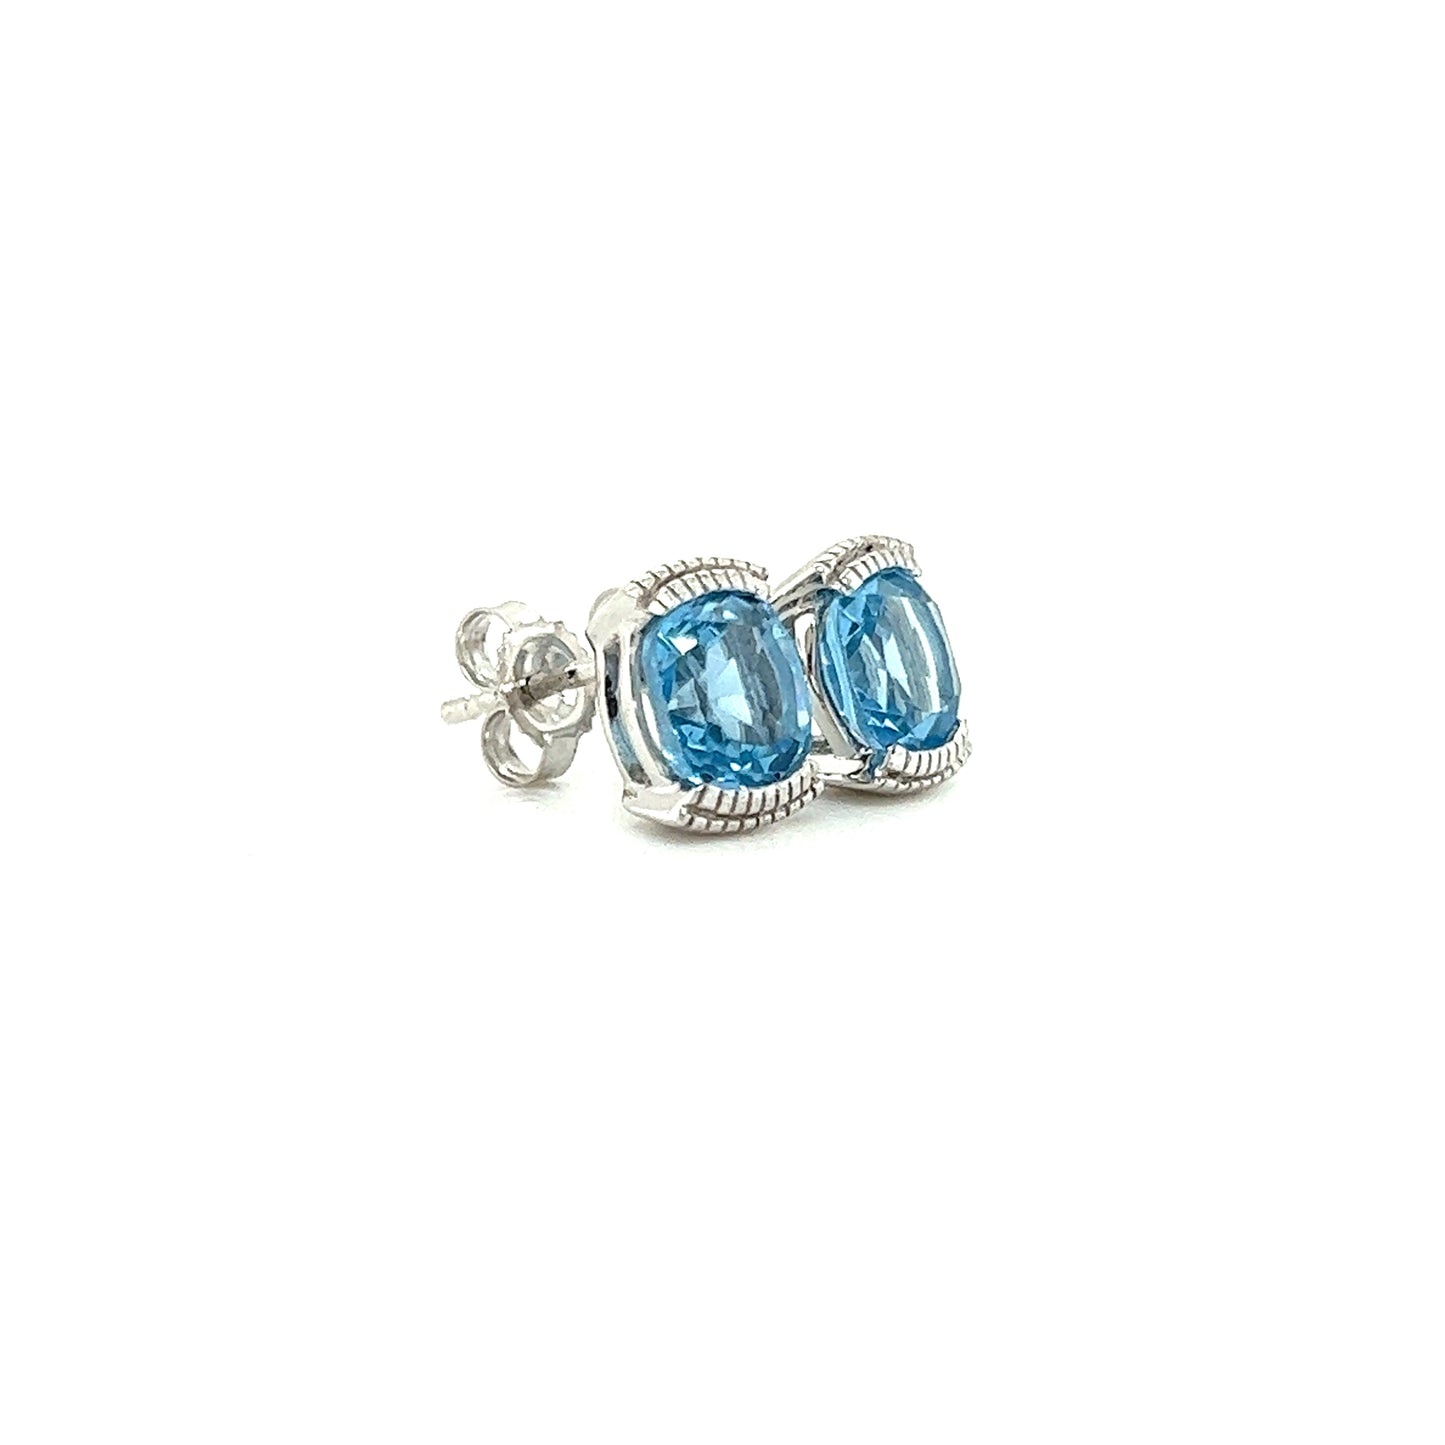 Cushion Blue Topaz Stud Earrings with 1.78ctw of Swiss Blue Topaz in 14K White Gold Left Side View